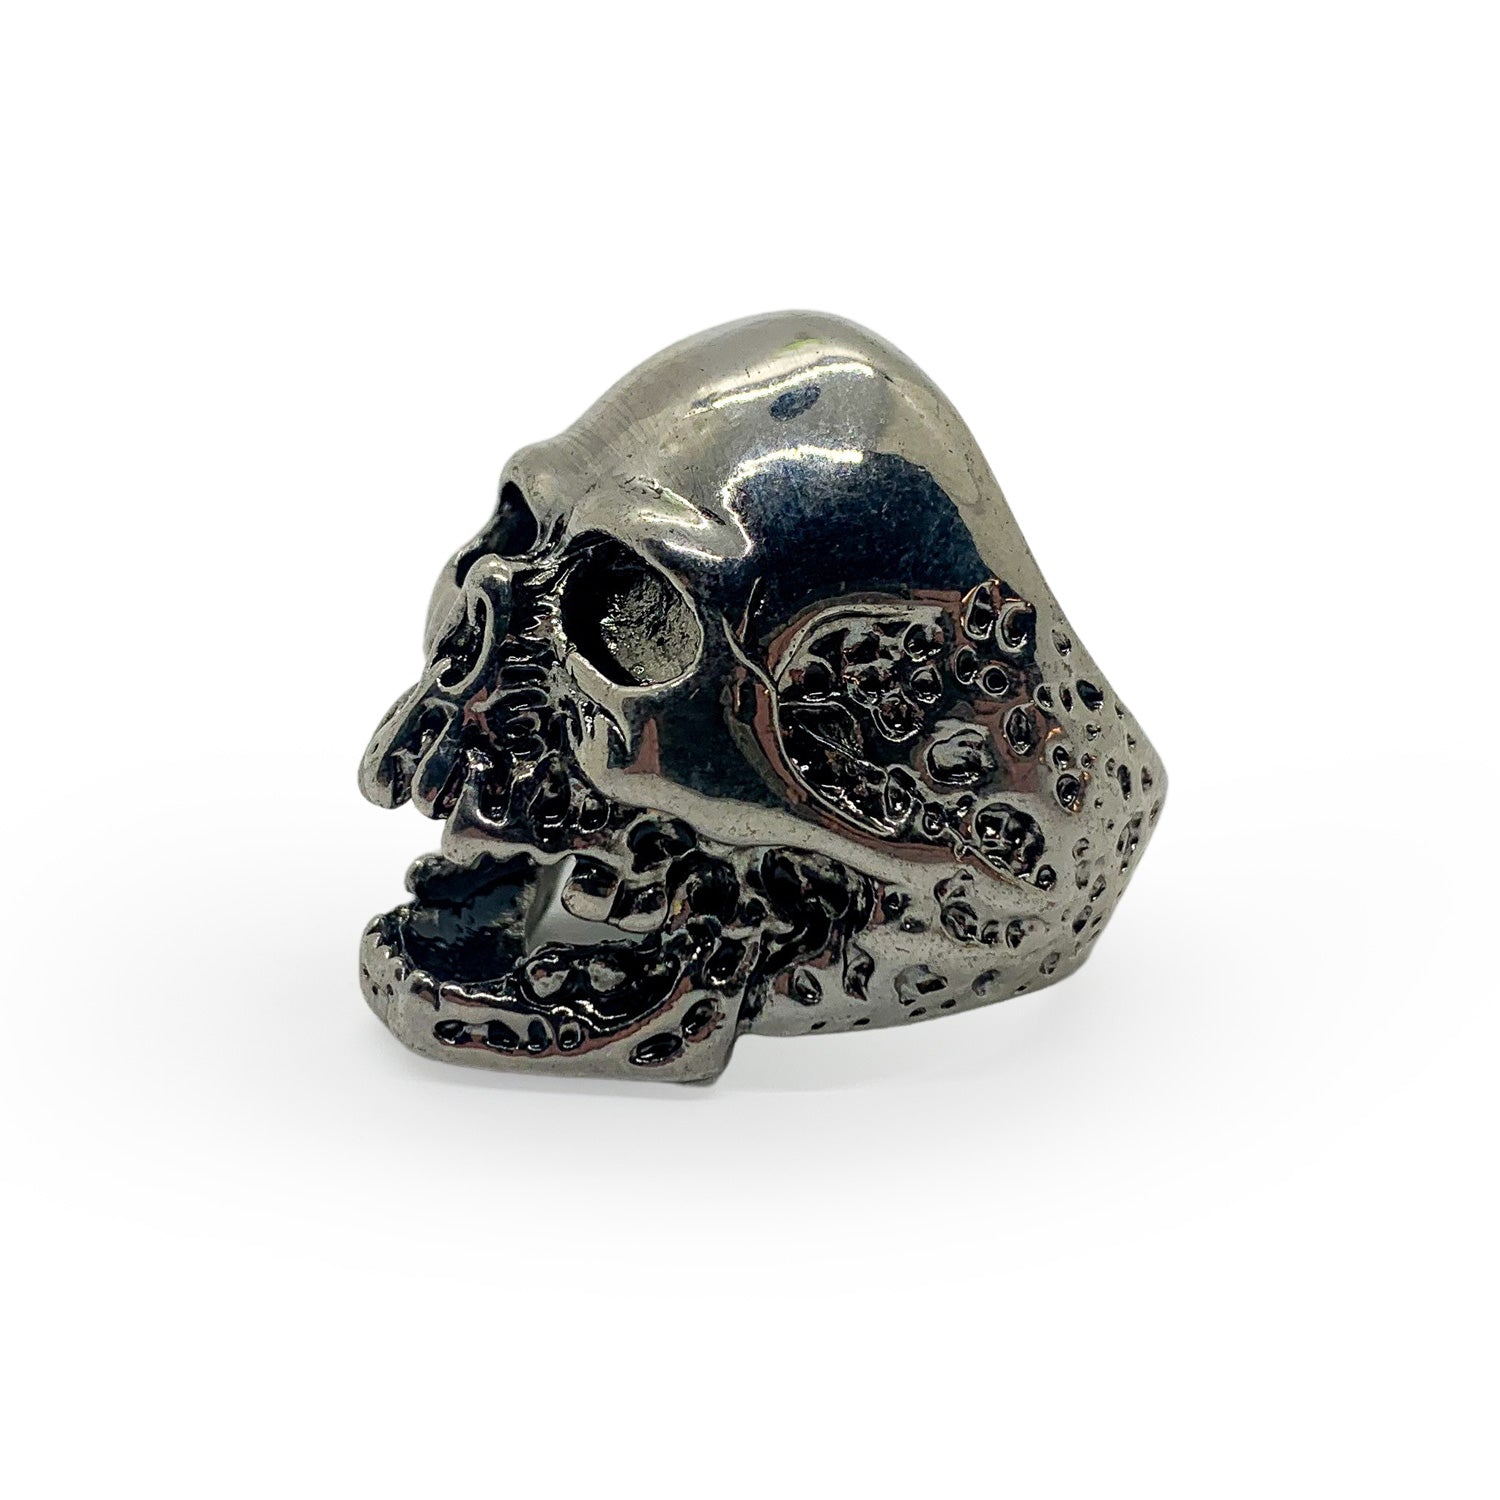 Gaping Eyes and Worm Holes Skull Ring Stainless Steel - US Size 9